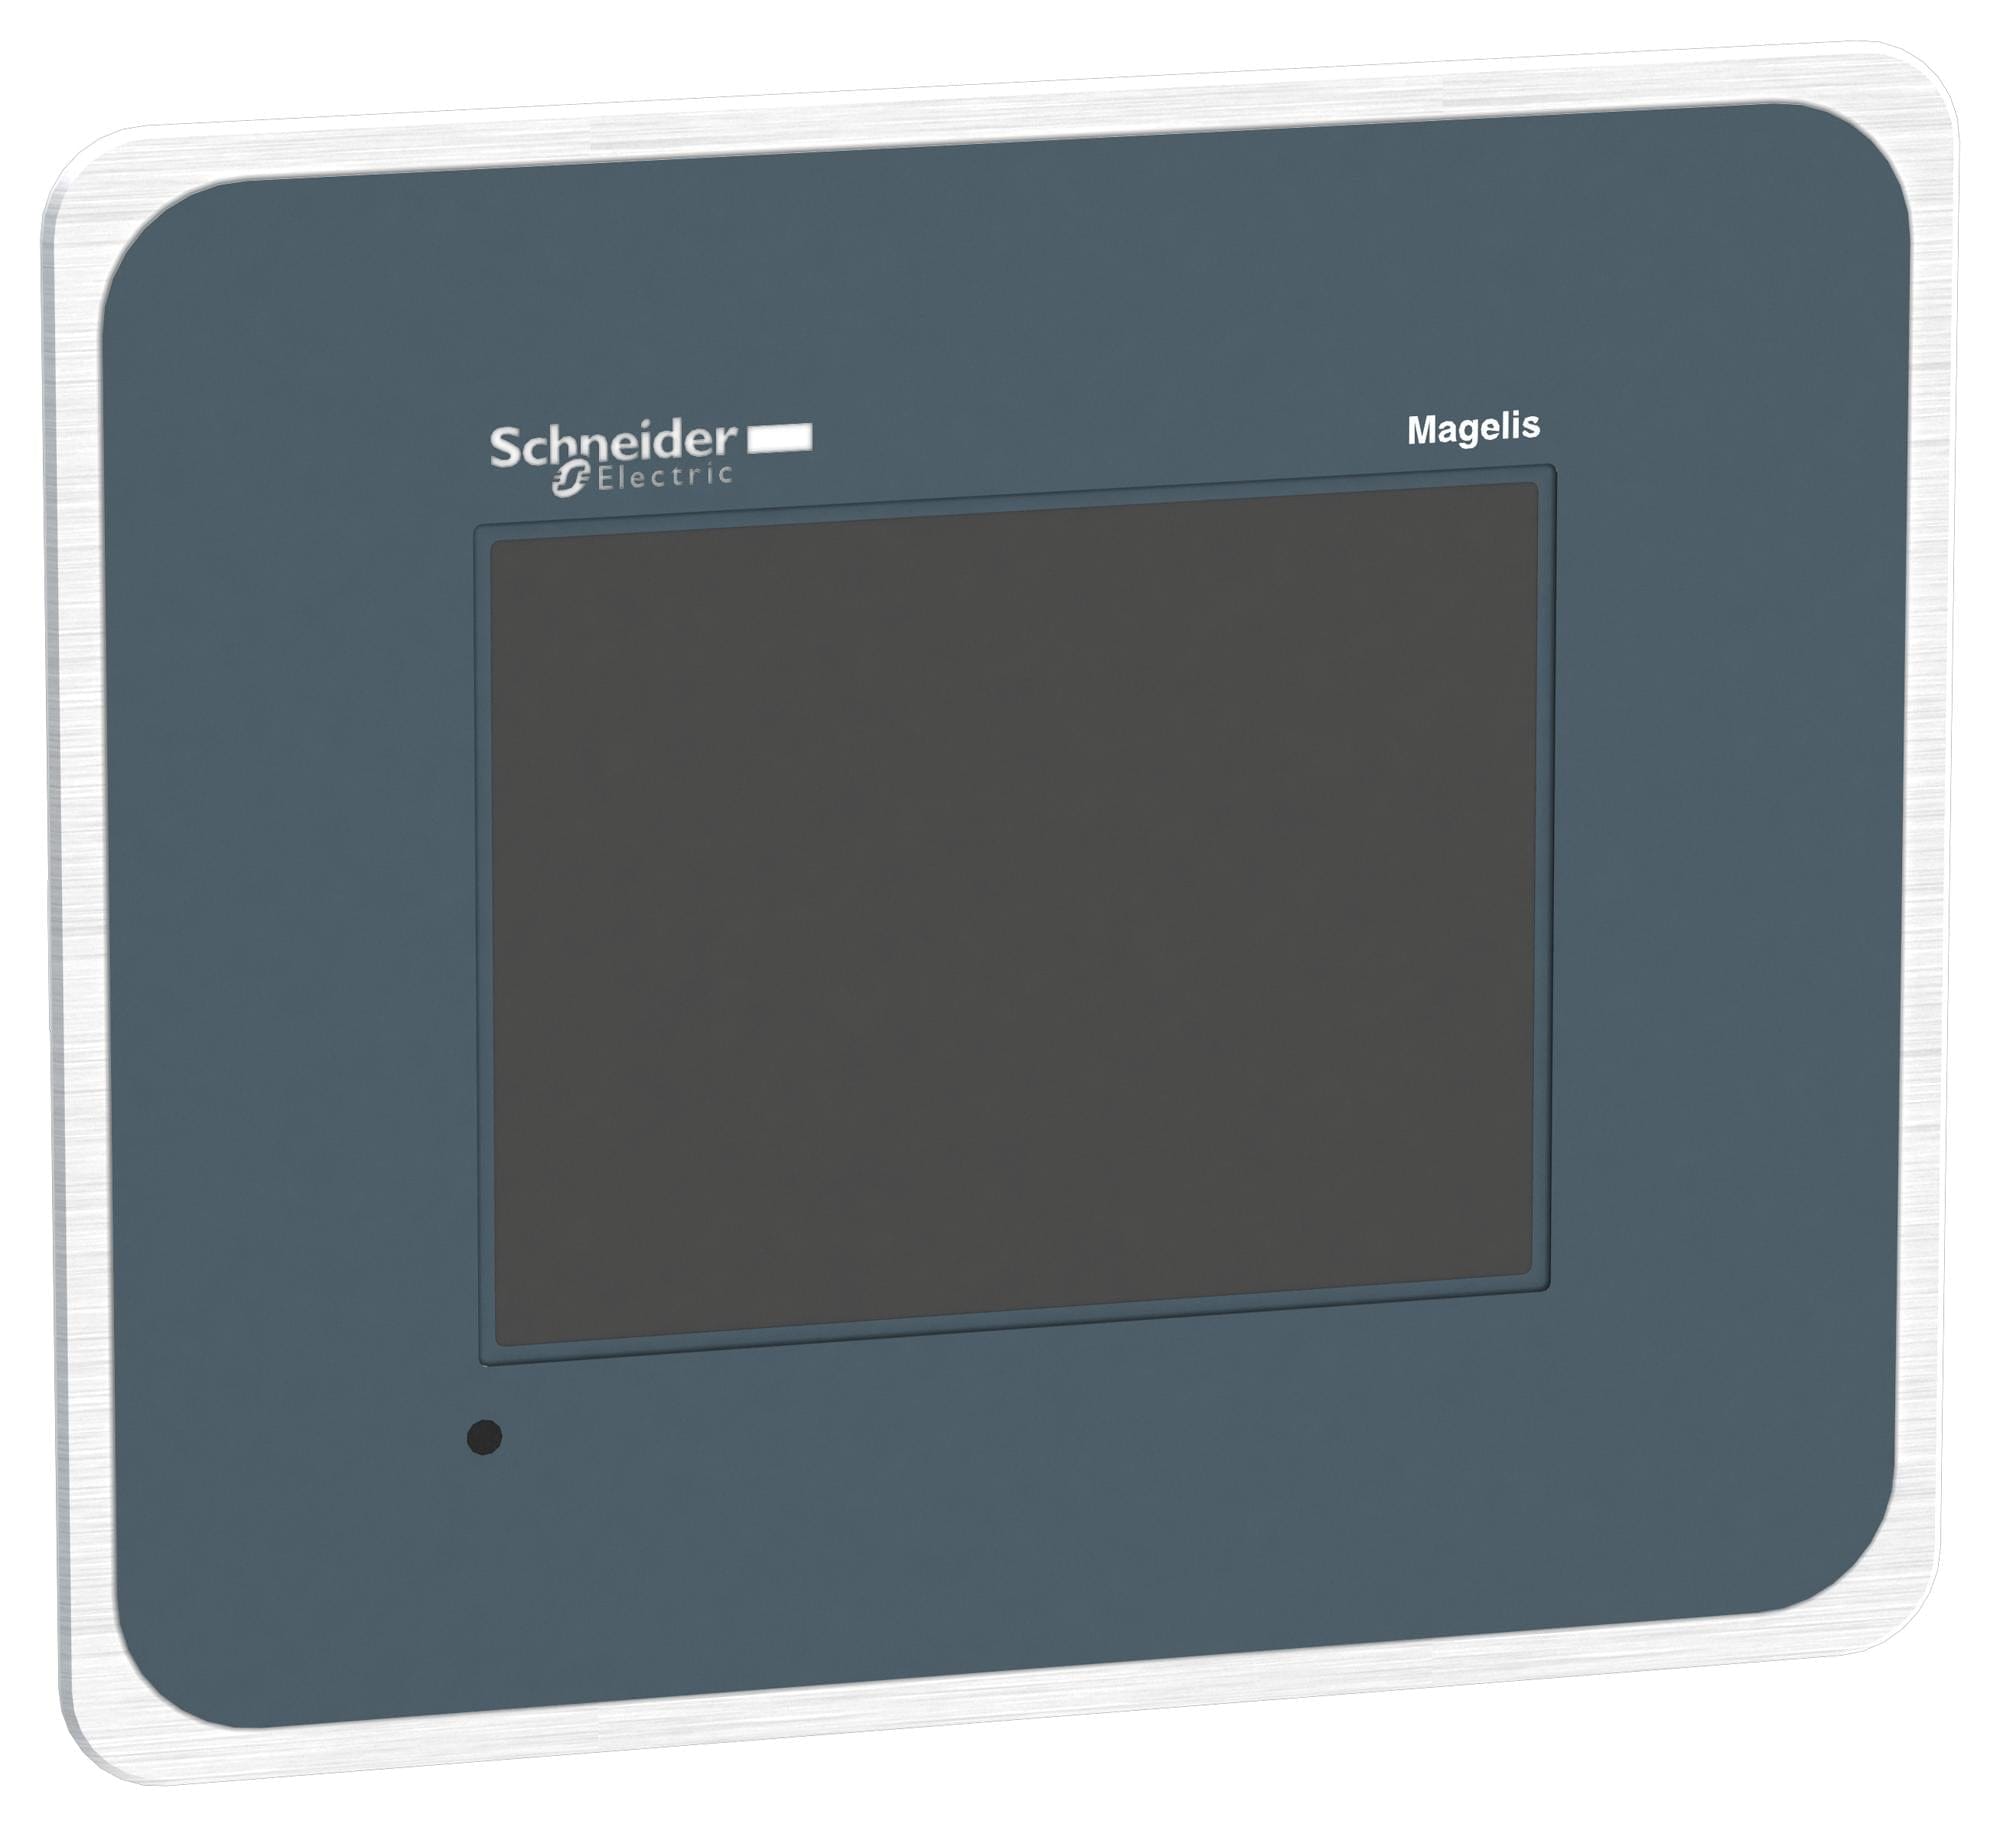 SCHNEIDER ELECTRIC Character HMIGTO2315 TOUCHSCREEN PANEL, 96MB, 5.7", 320 X 240 SCHNEIDER ELECTRIC 3109861 HMIGTO2315